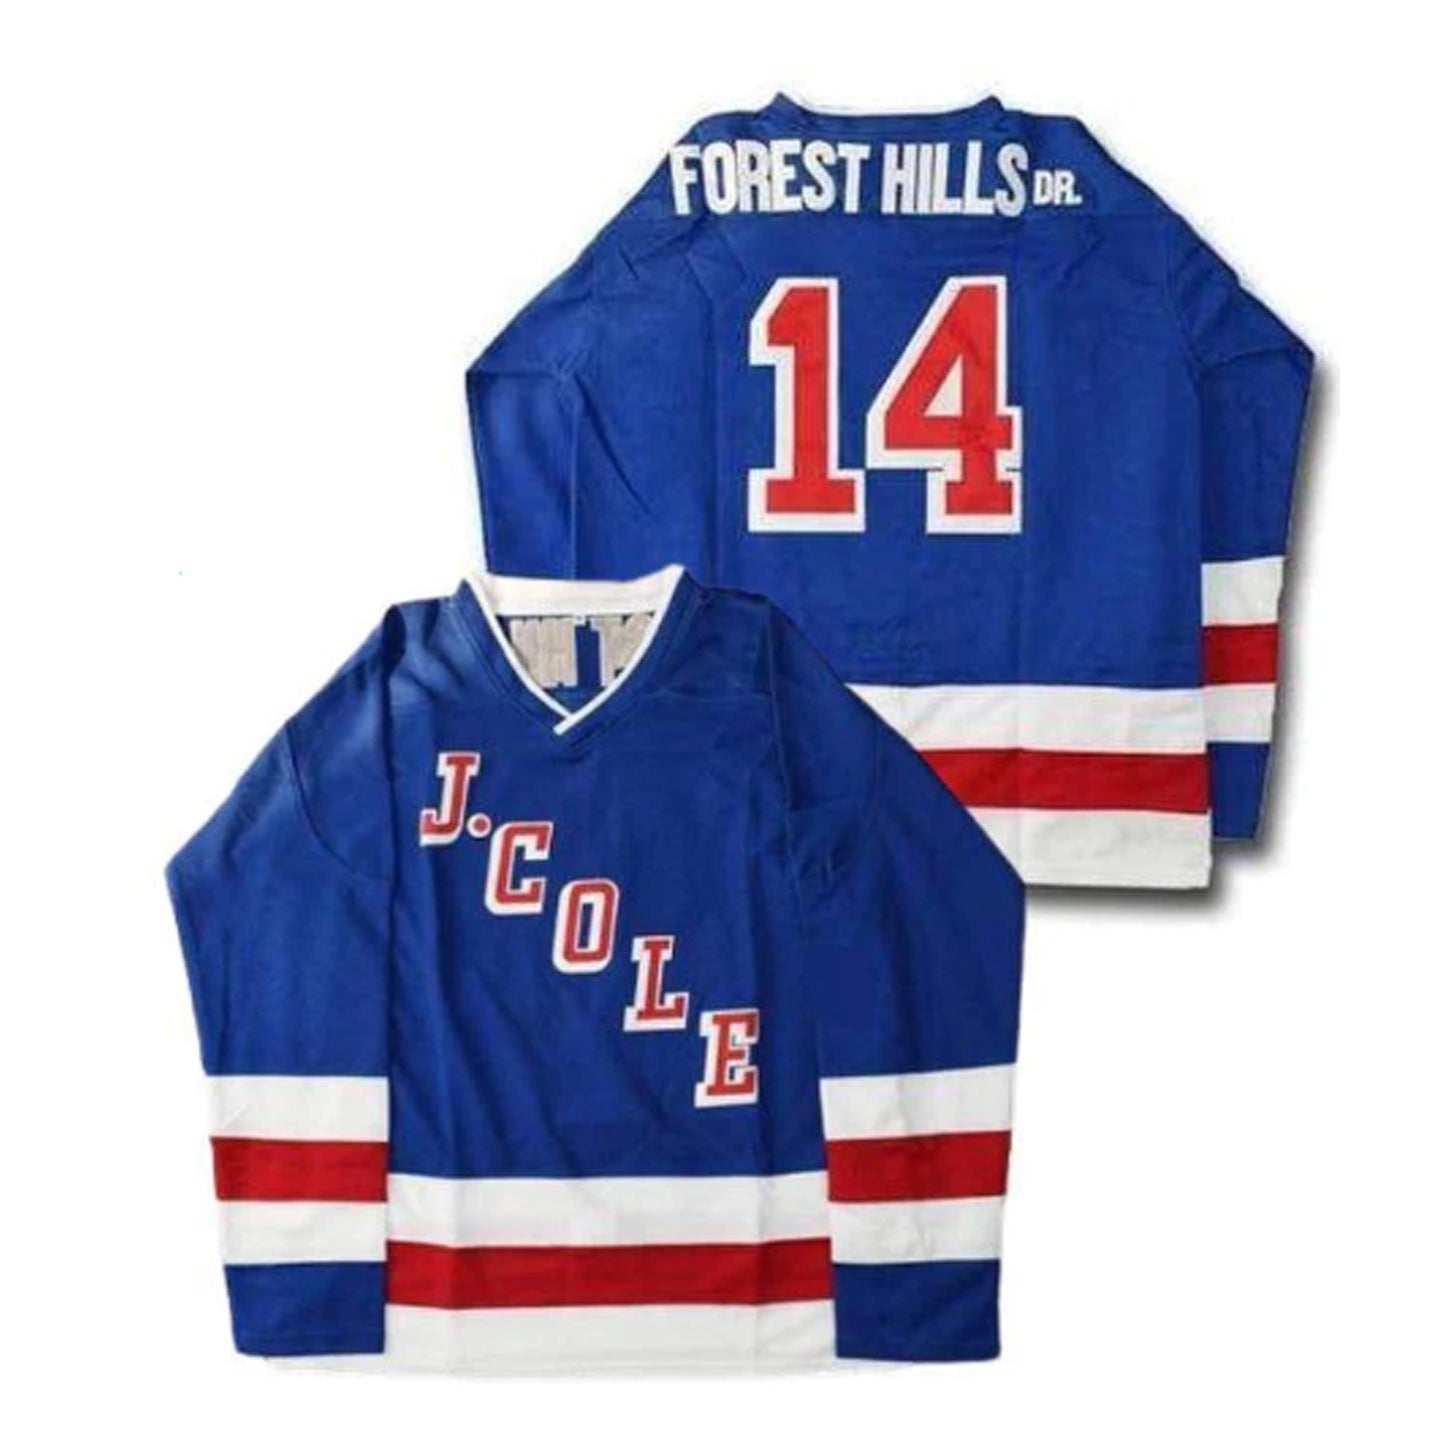 J Cole Forest Hills Dr. Hockey 14 Jersey